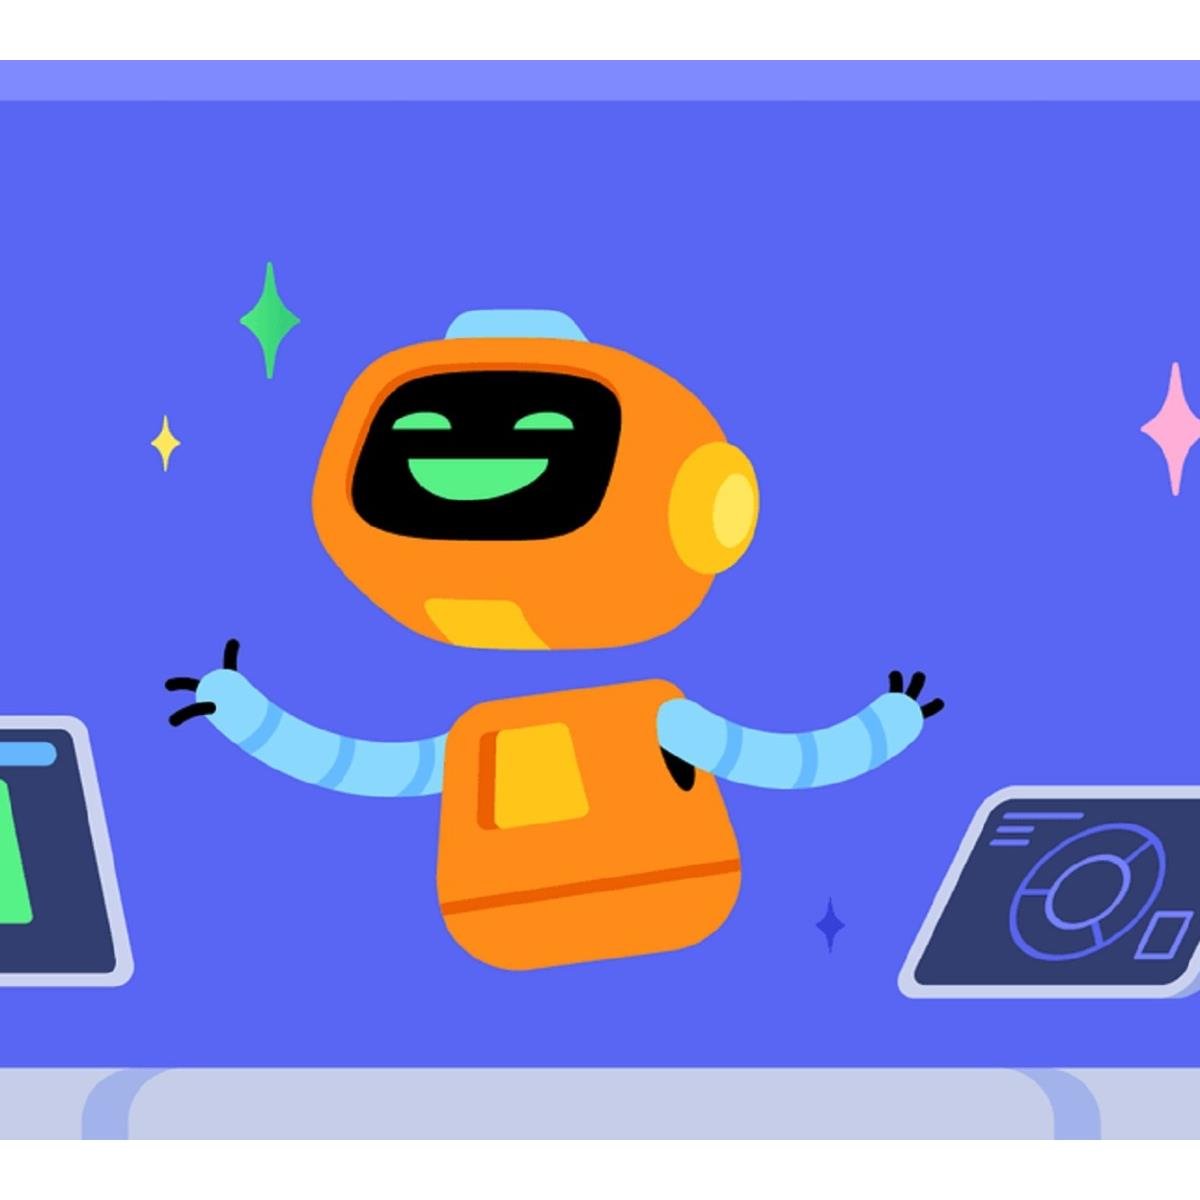 More AI experiences are coming to Discord, including ChatGPT